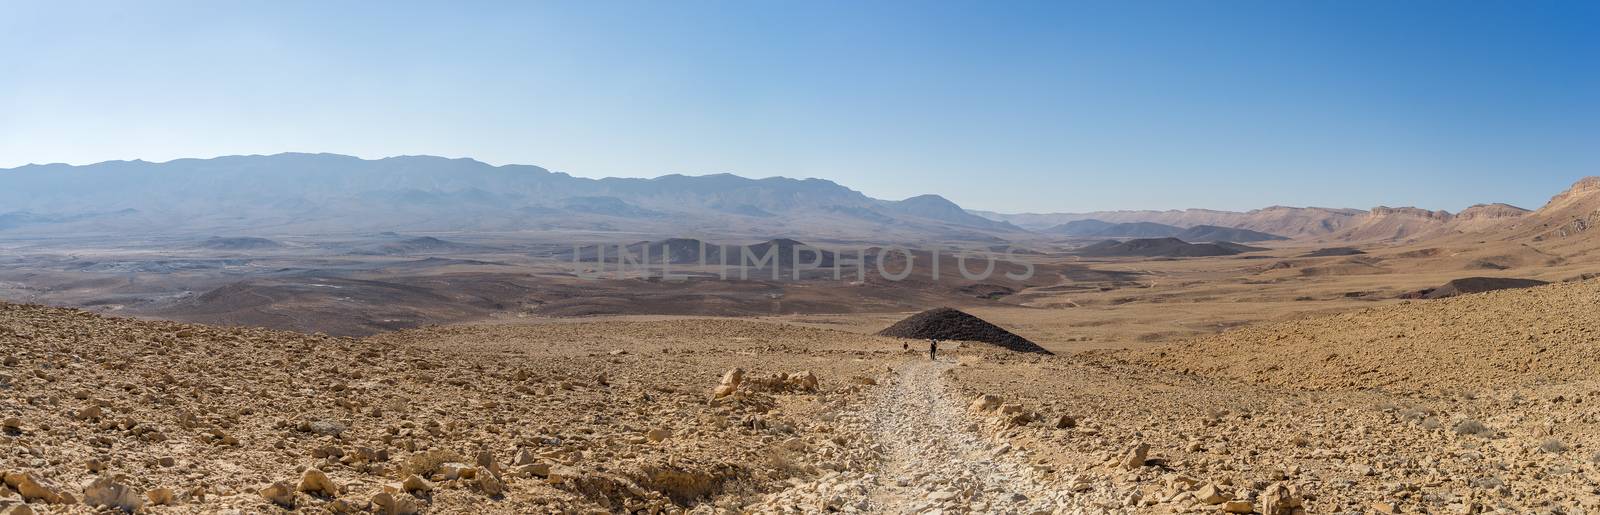 View of ramon crater desert of southern israel during hiking